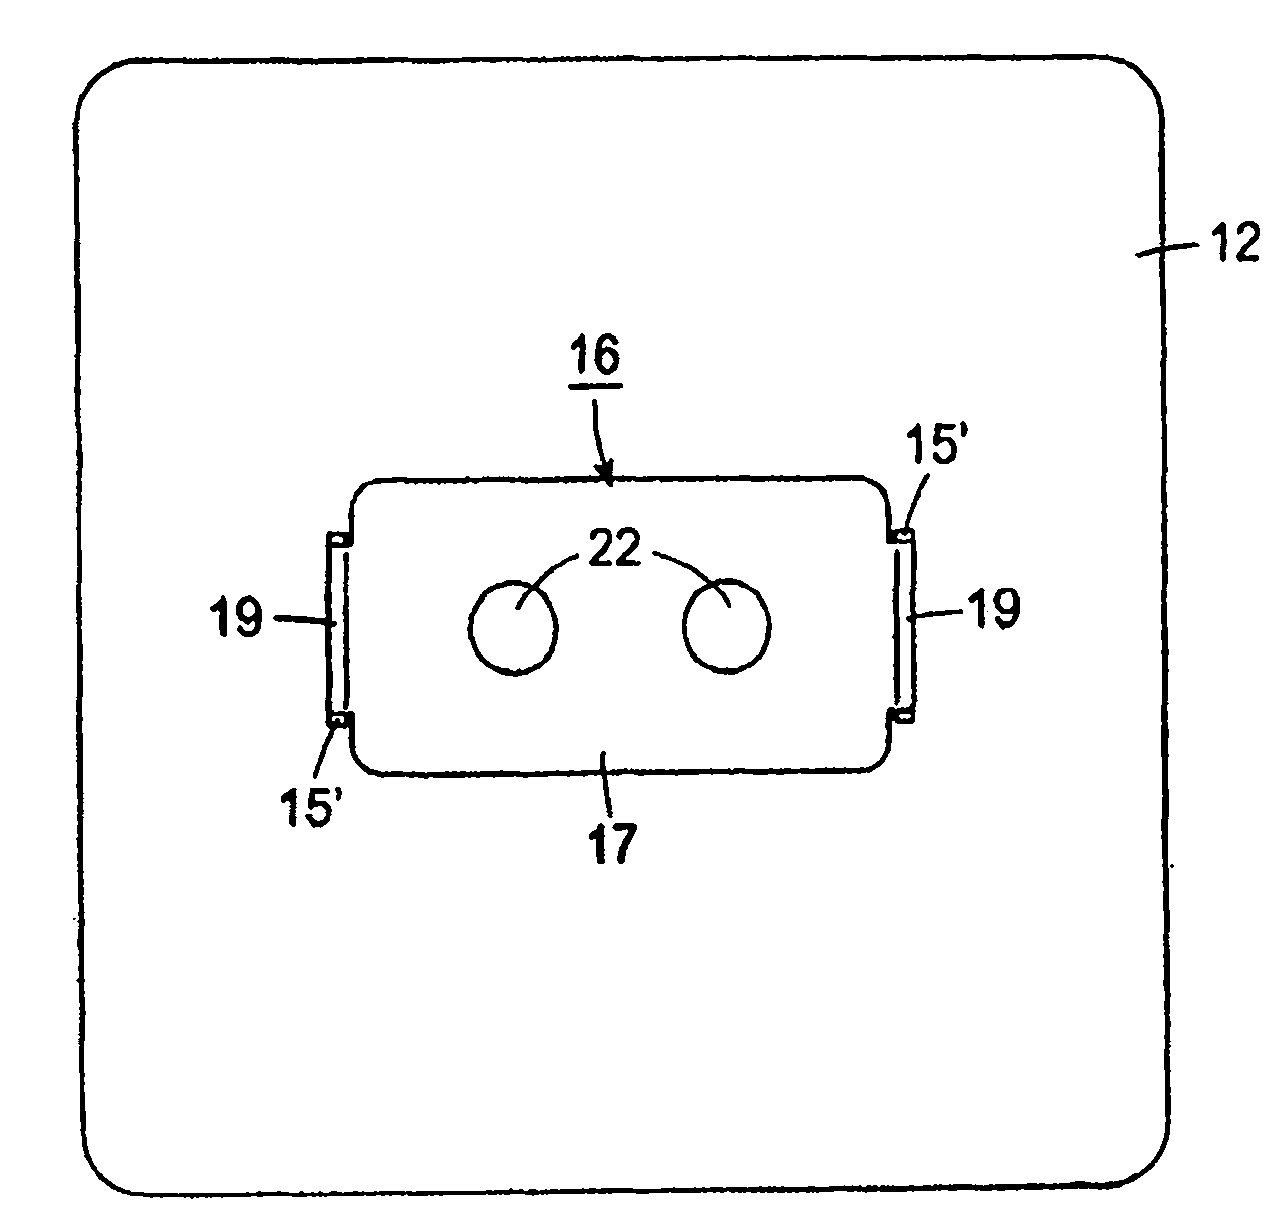 Valve for a contact tray